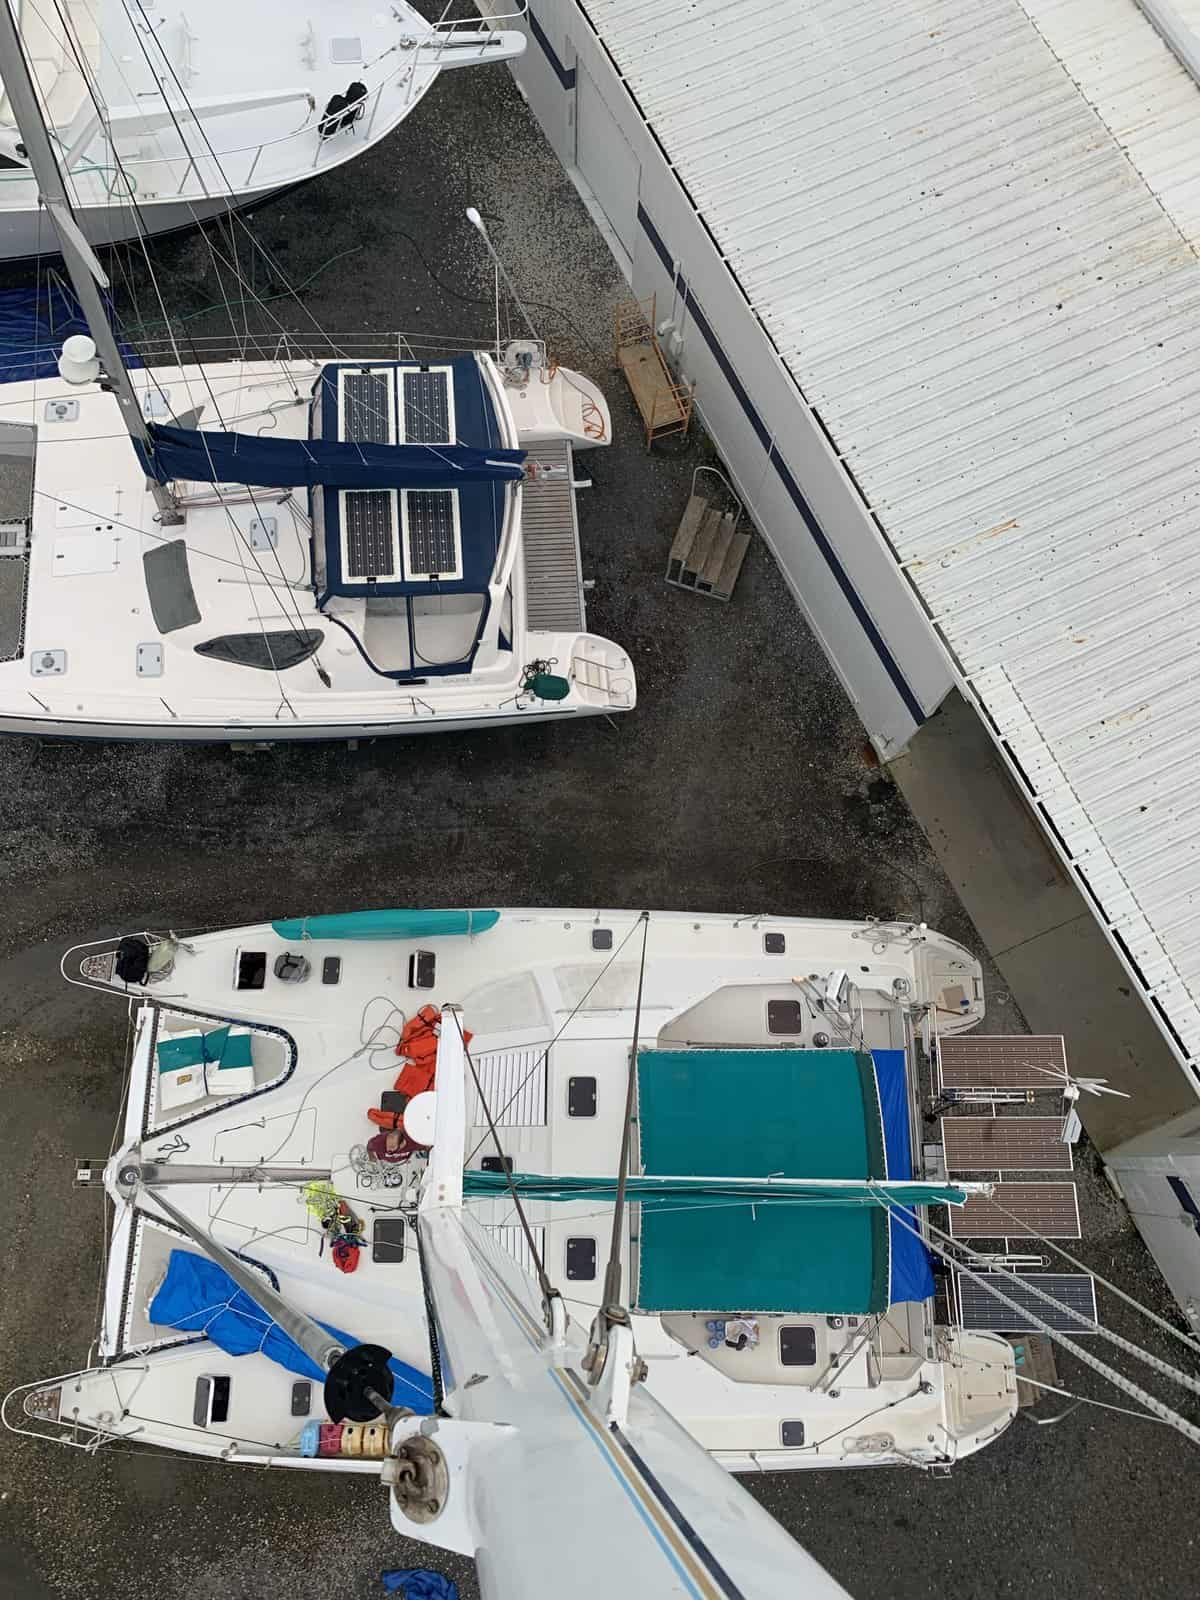 a view onto a catamaran from the top of its mast